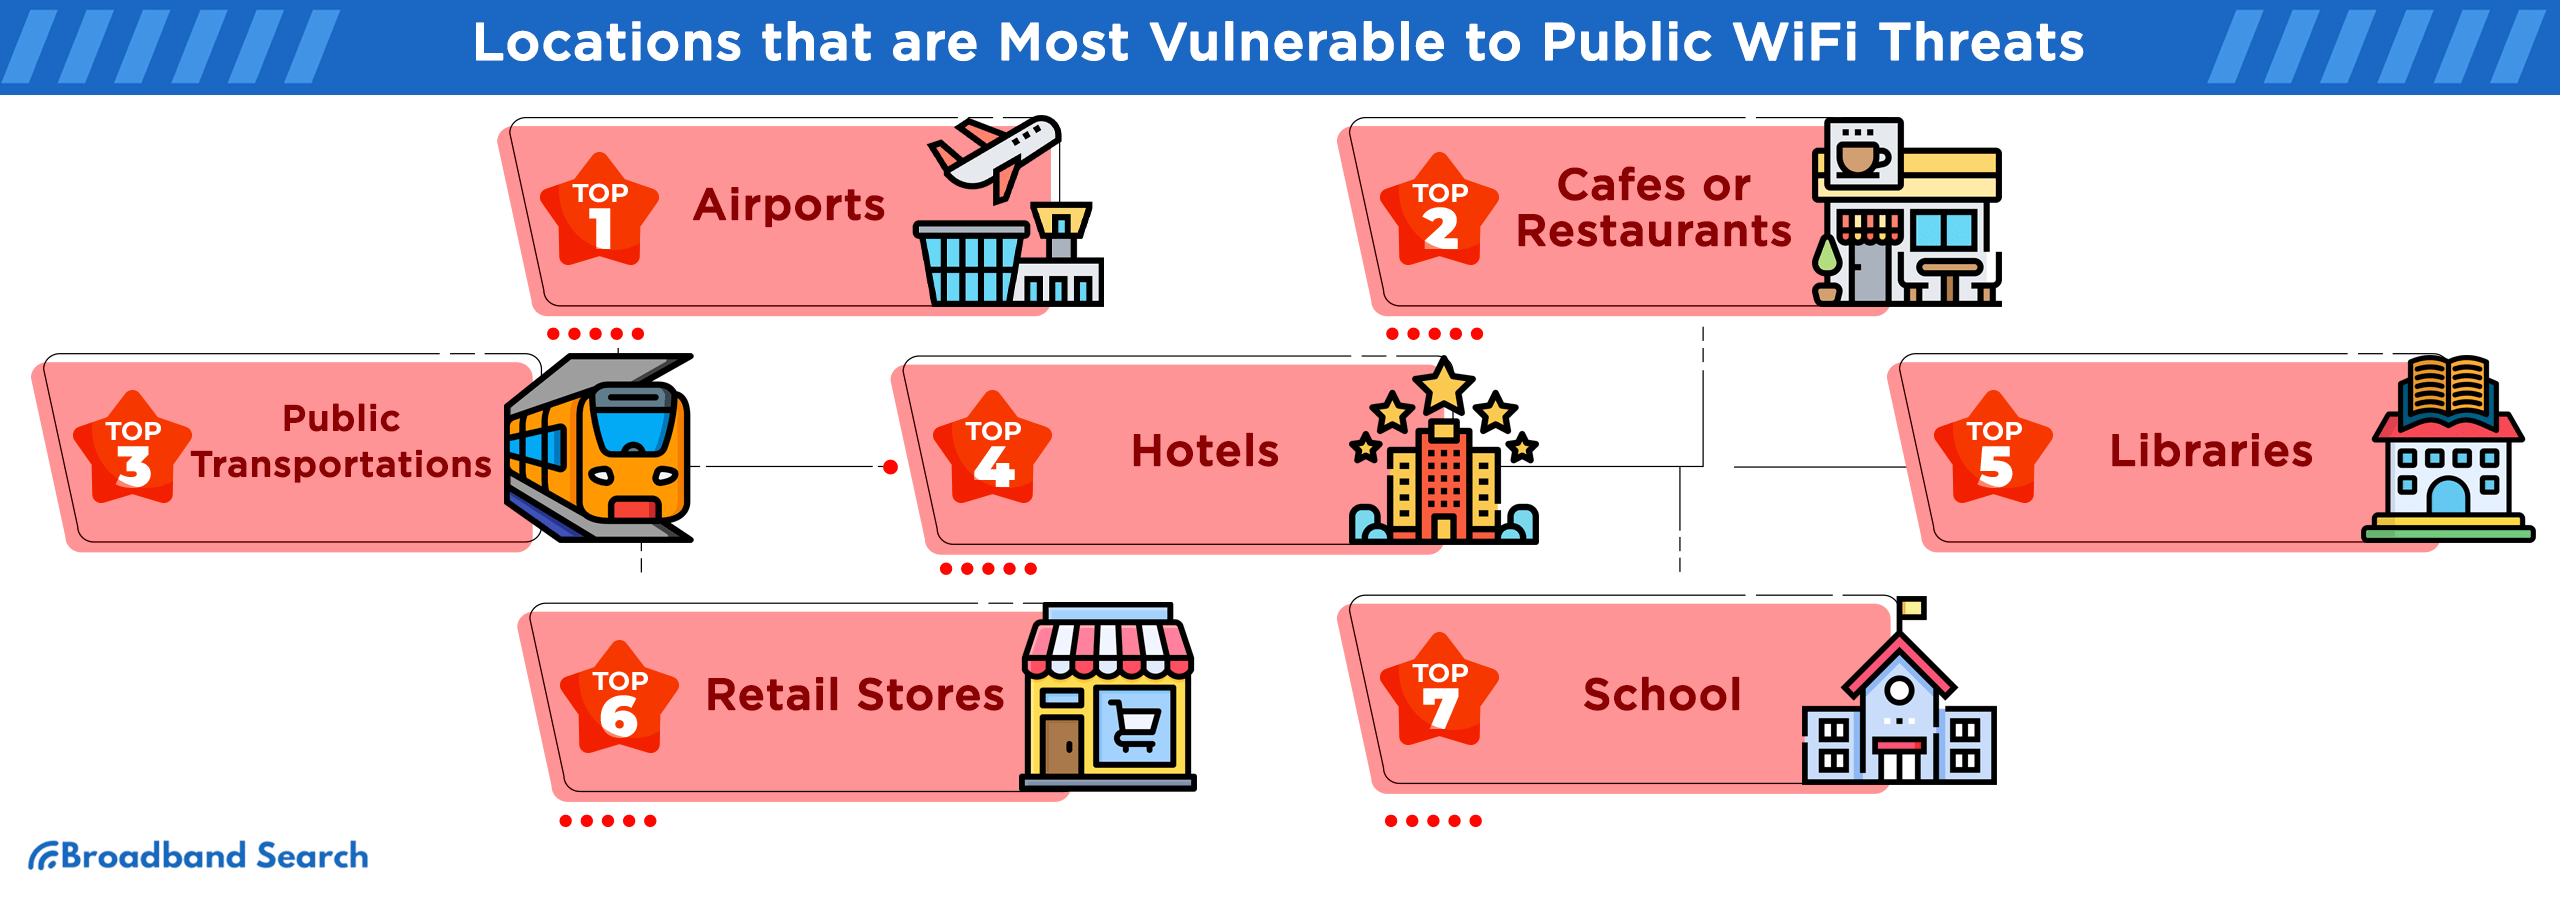 locations that are the most vulnerable to public wifi threats